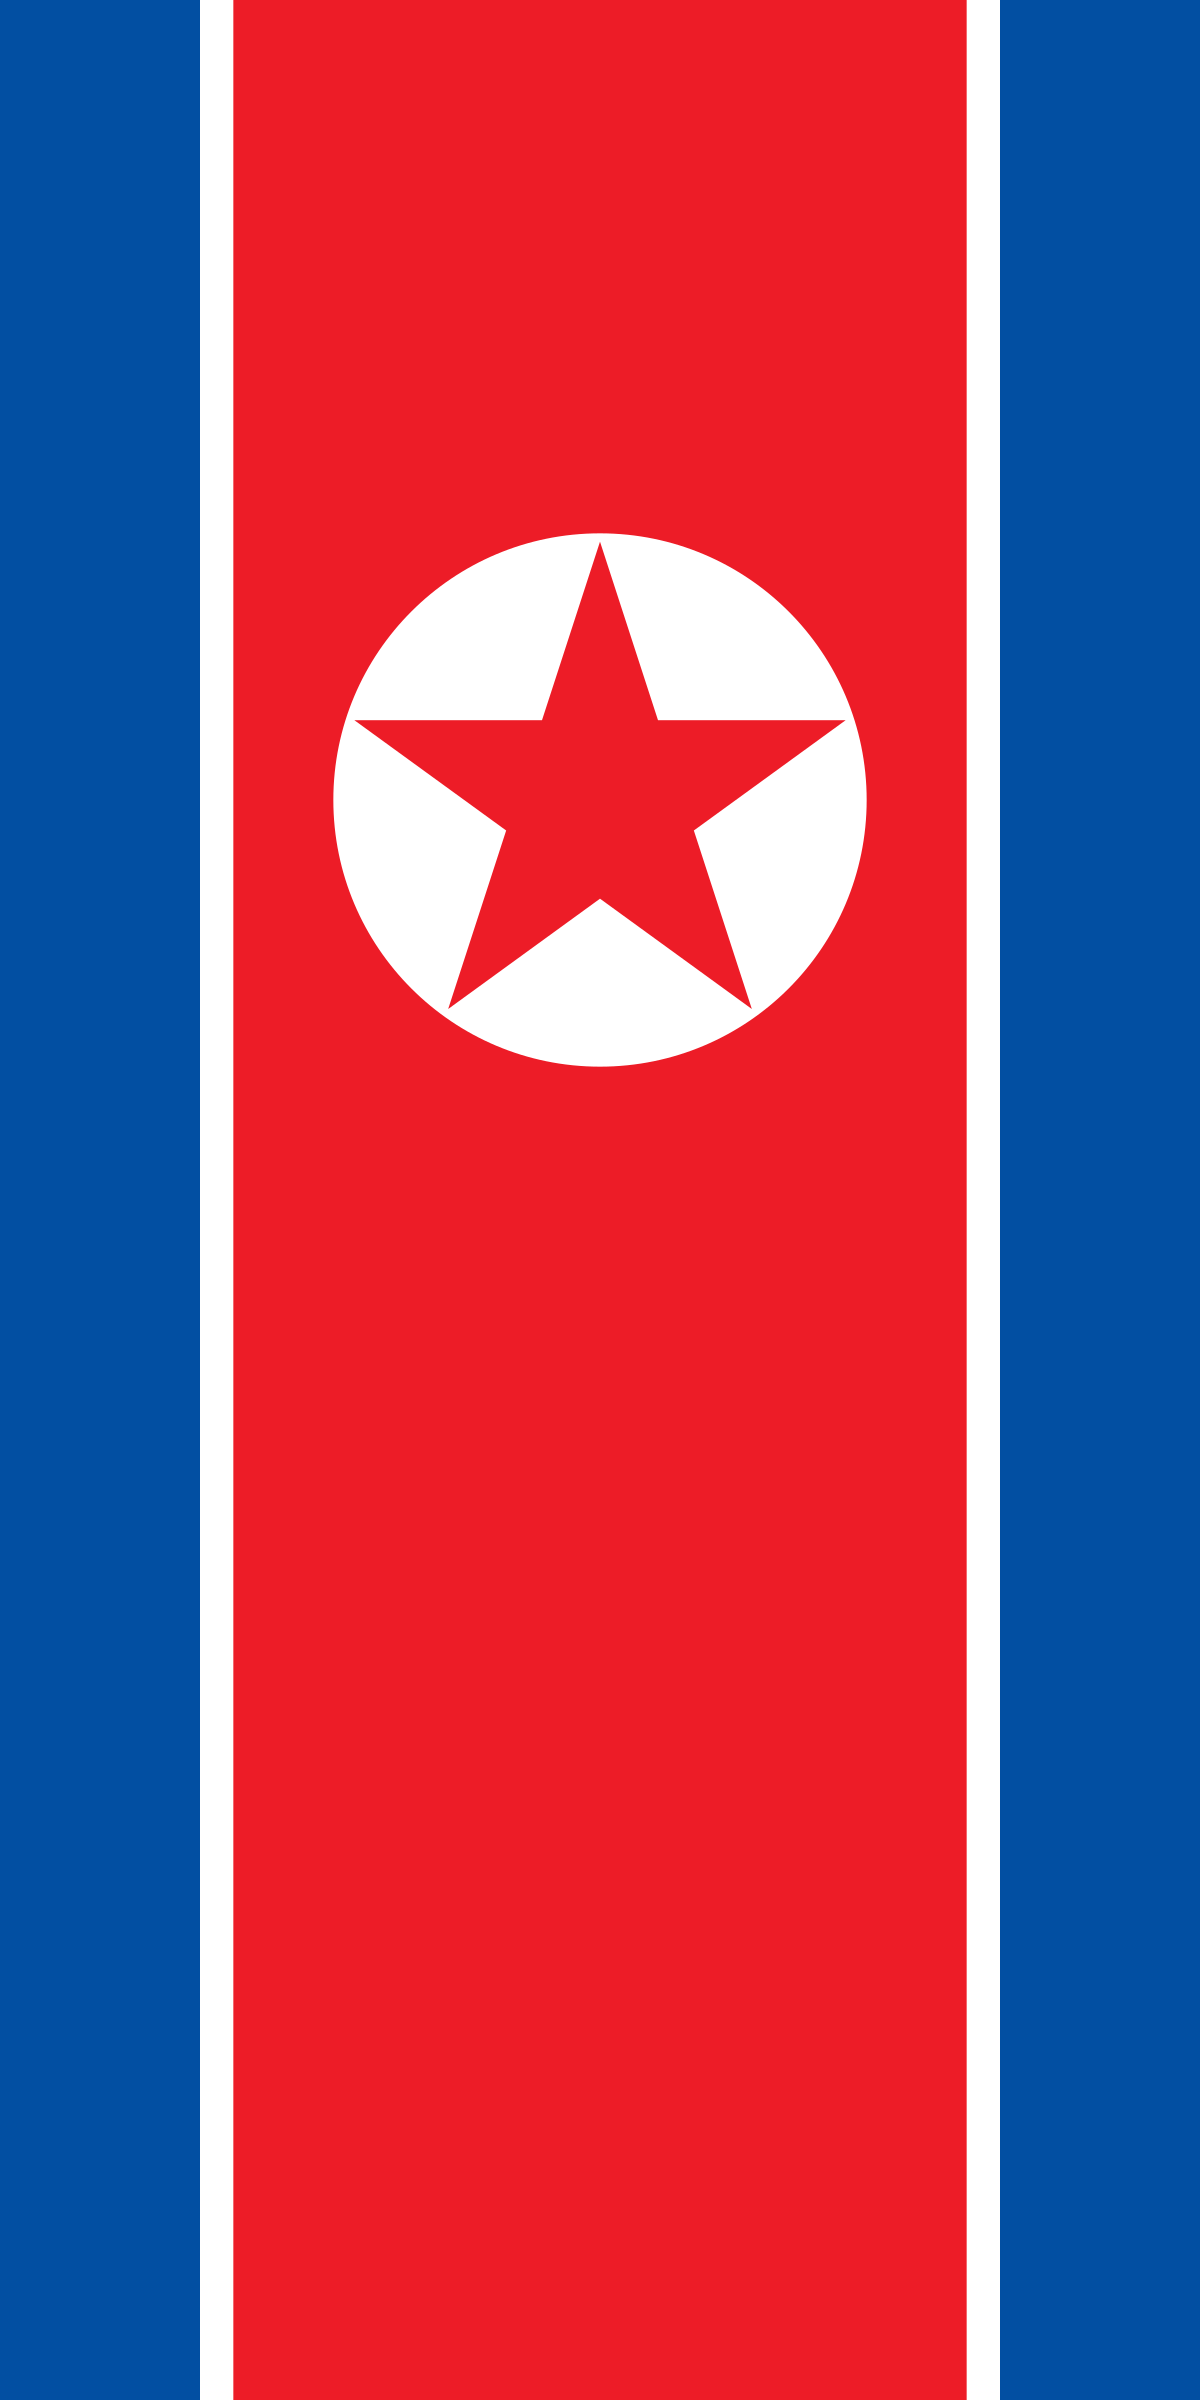 Download File:Vertical Flag of North Korea.svg - Wikimedia Commons